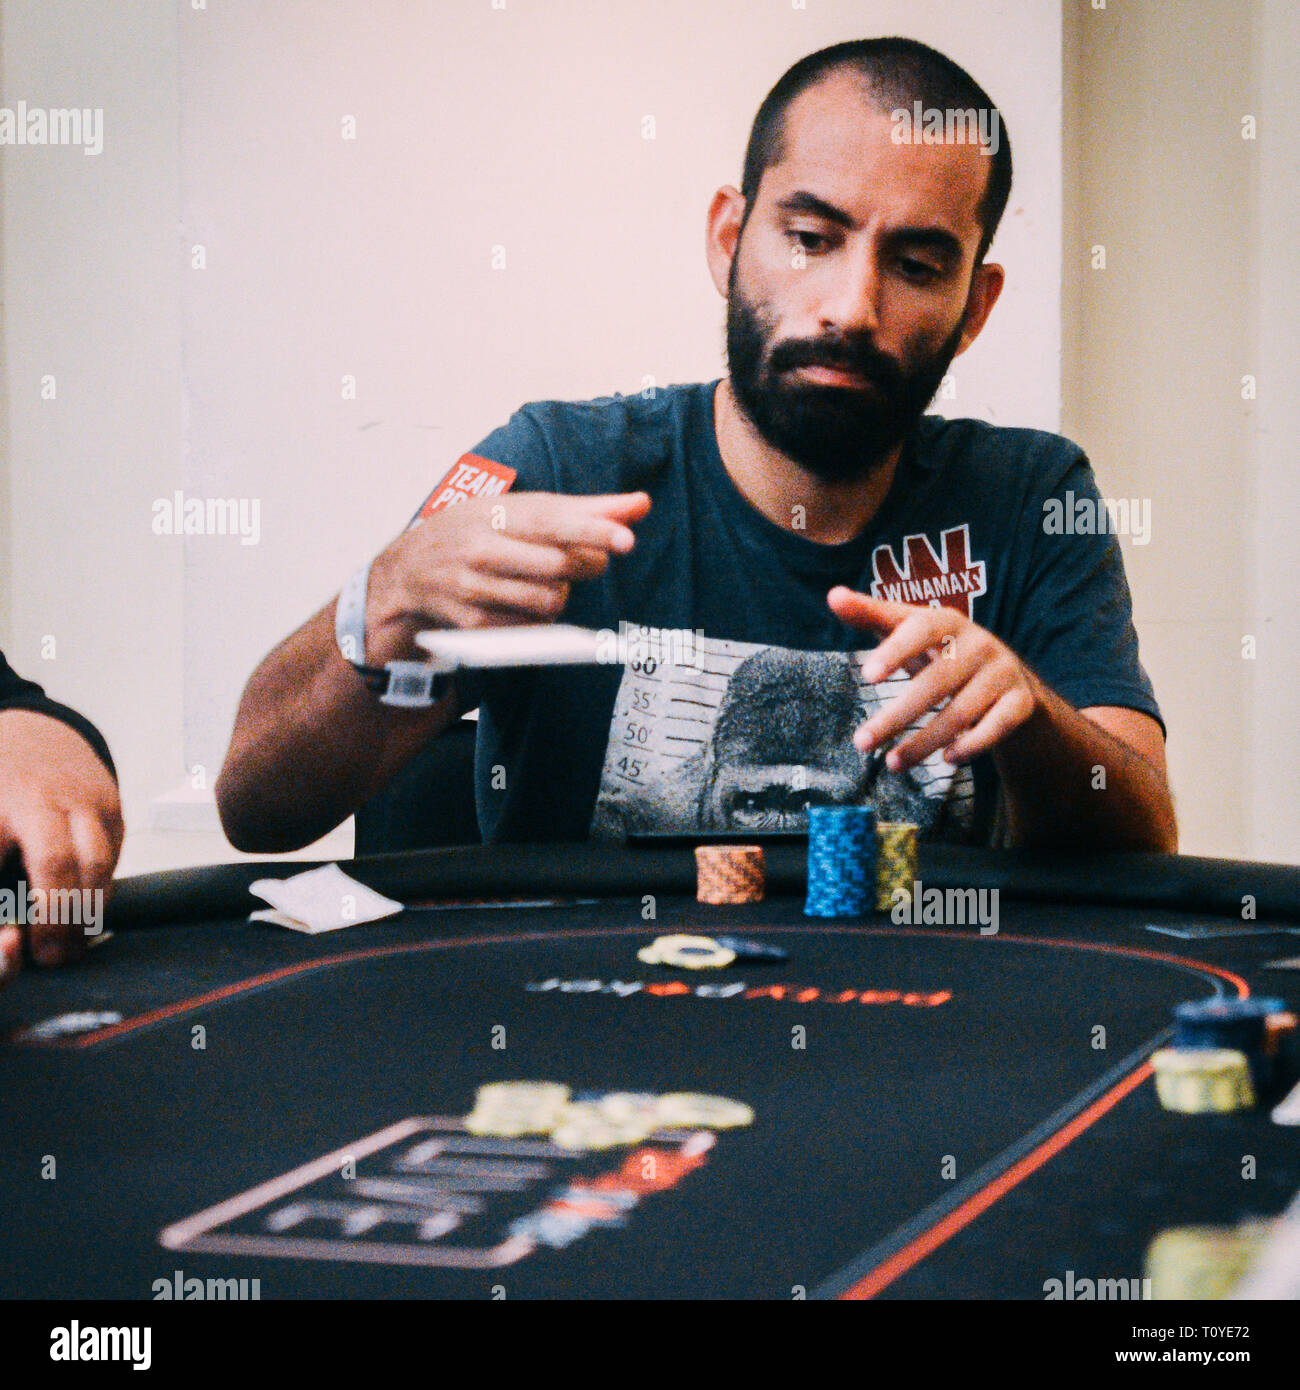 Rio de Janeiro, Brazil - March 21st, 2019: Joao Vieira, Professional Portuguese player at the Main Event of the PartyPoker LIVE MILLIONS South America 2019 occuring at the luxurious Copacabana Palace Belmond Hotel in Rio de Janeiro, Brazil from March 15th through March 24th, 2019. Credit: Alexandre Rotenberg/Alamy Live News Stock Photo